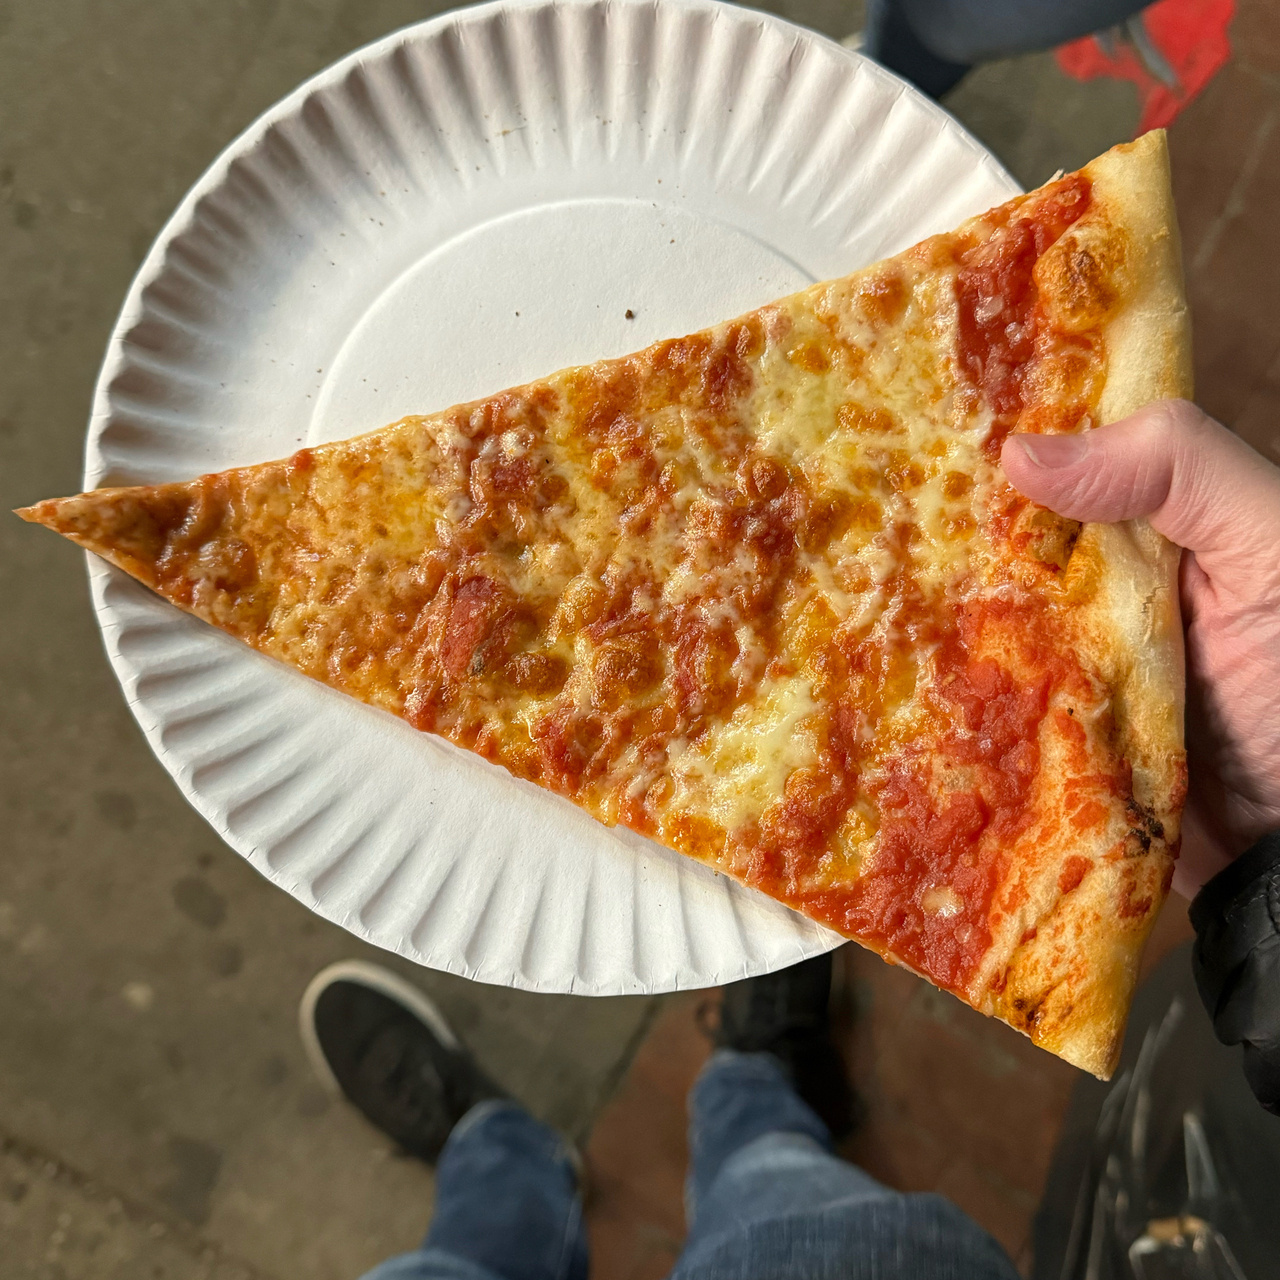 Slice of cheese pizza held in hand on a paper plate